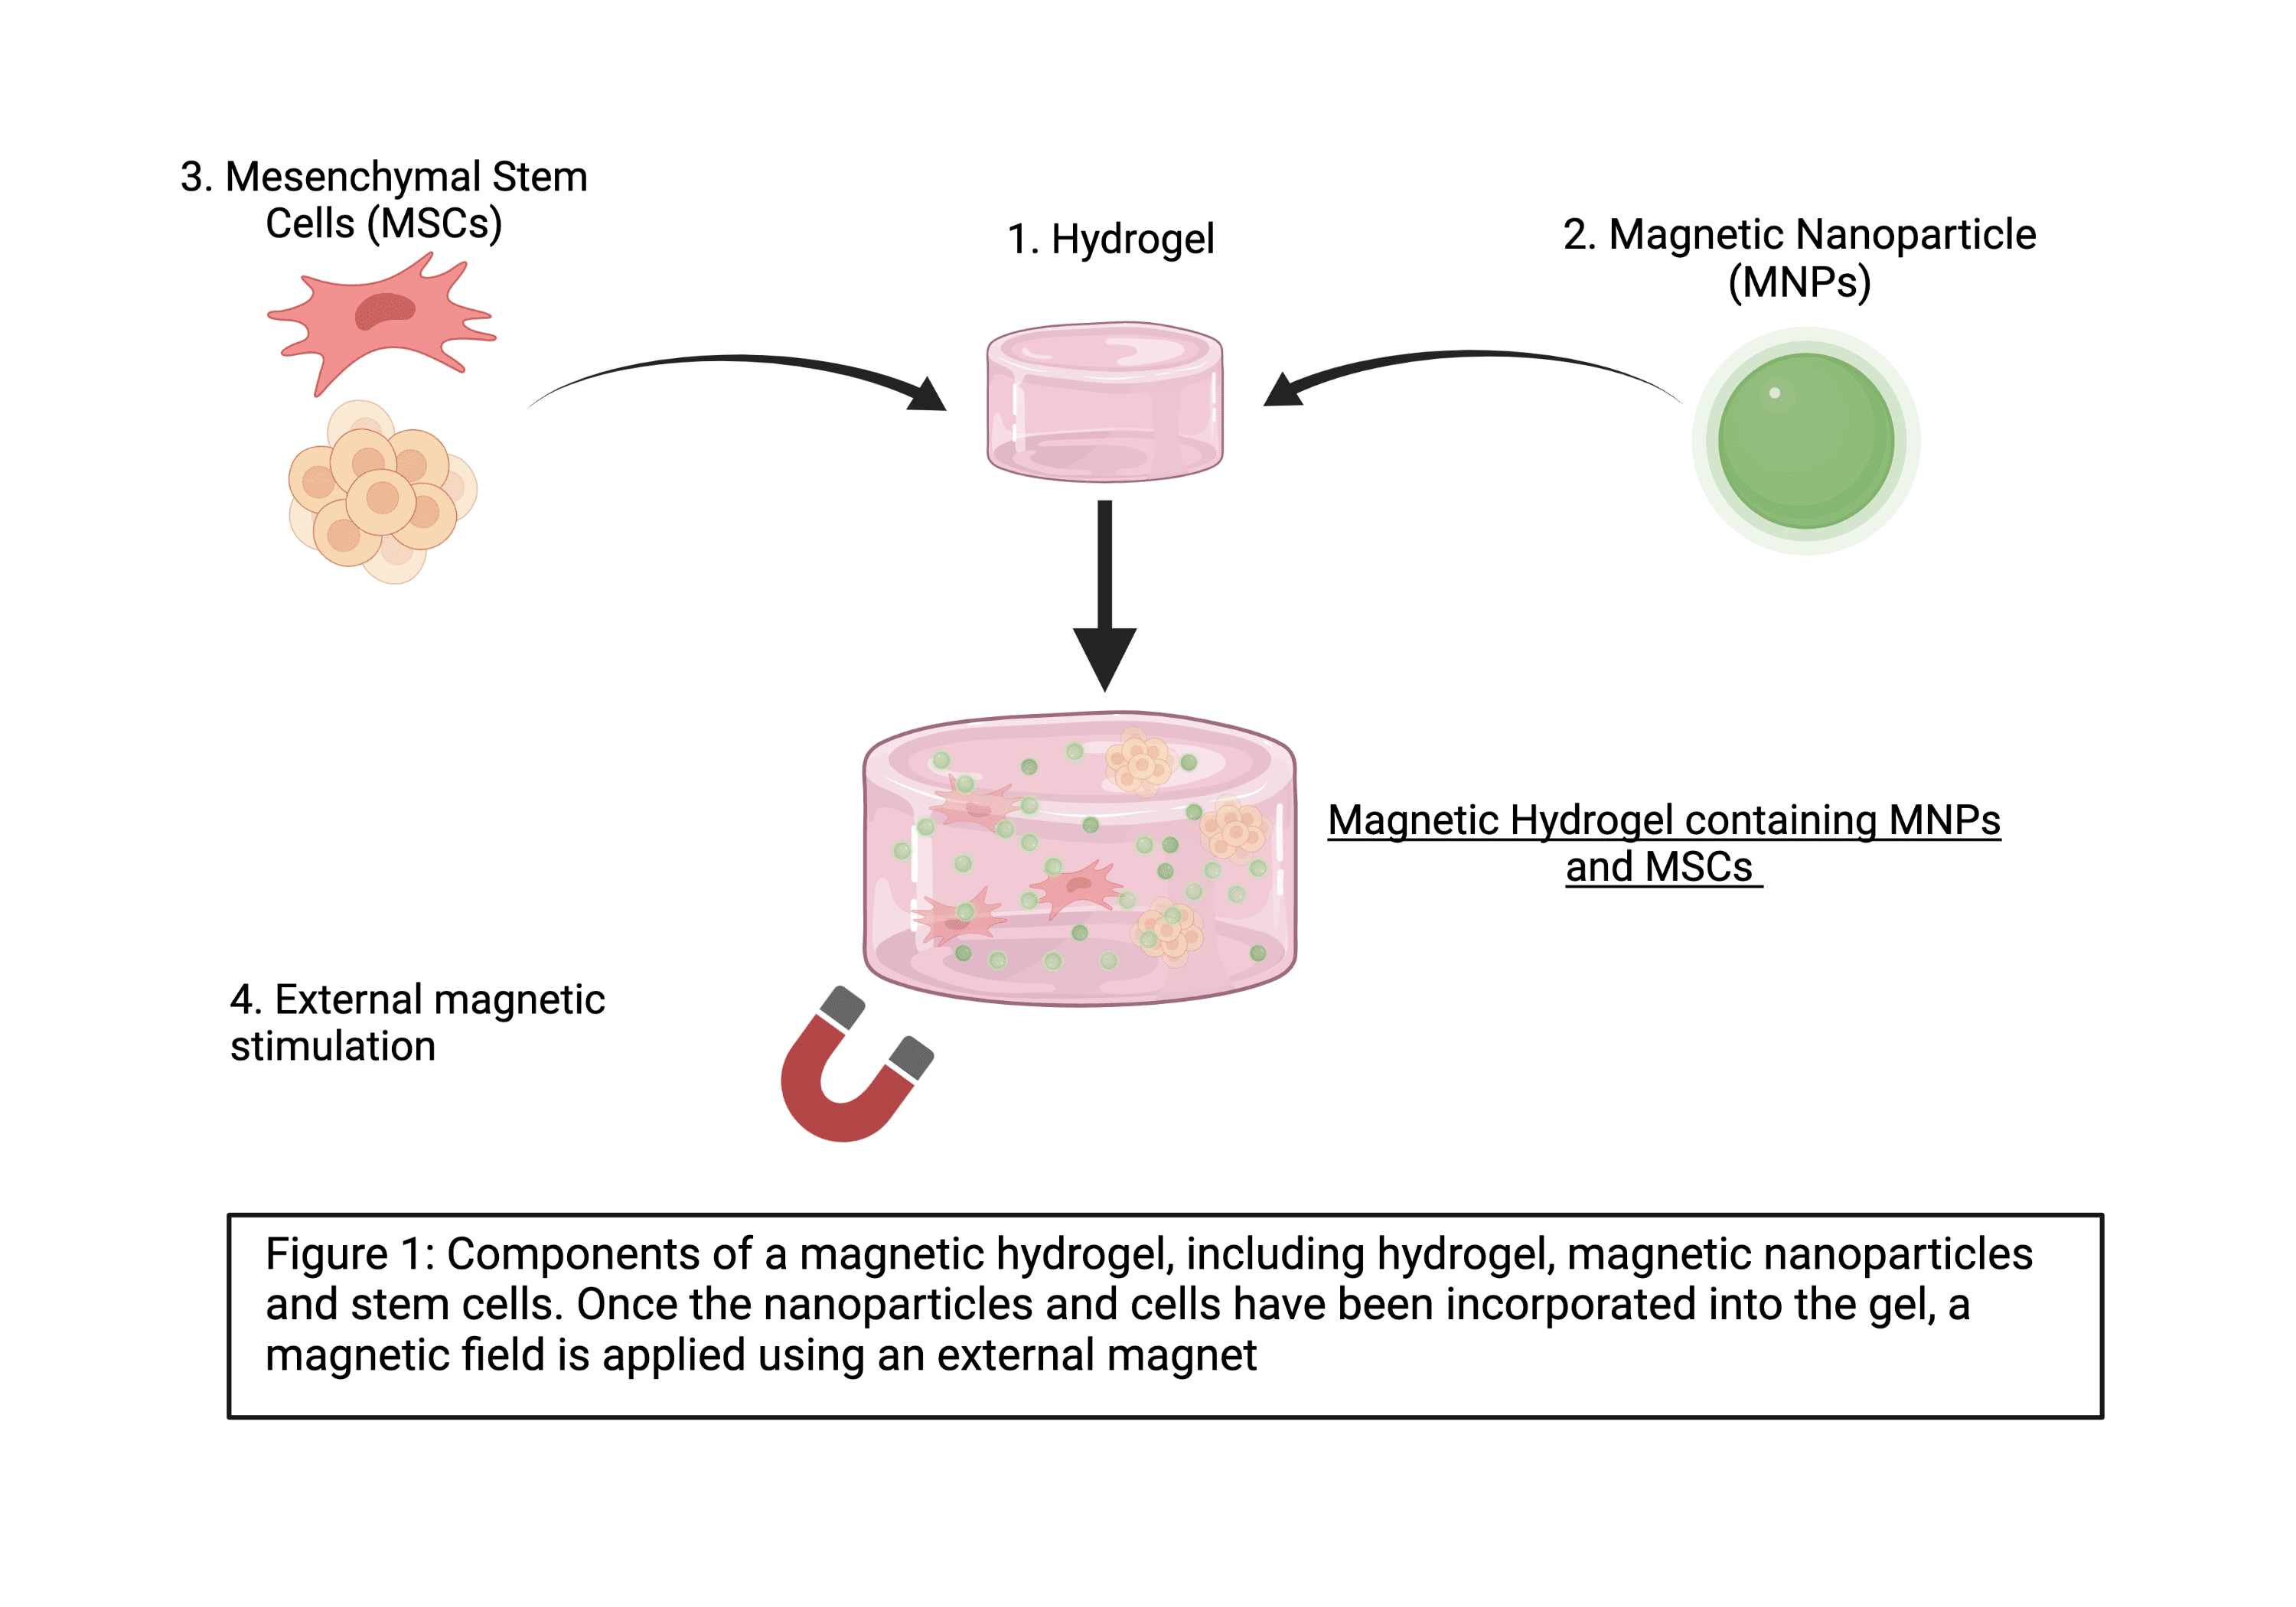 Figure 1. Components of a magnetic hydrogel, including hydrogel, magnetic nanoparticles and stem cells. Once the nanoparticles and cells have been incorporated into the gel, a magnetic field is applied using an external magnet. 